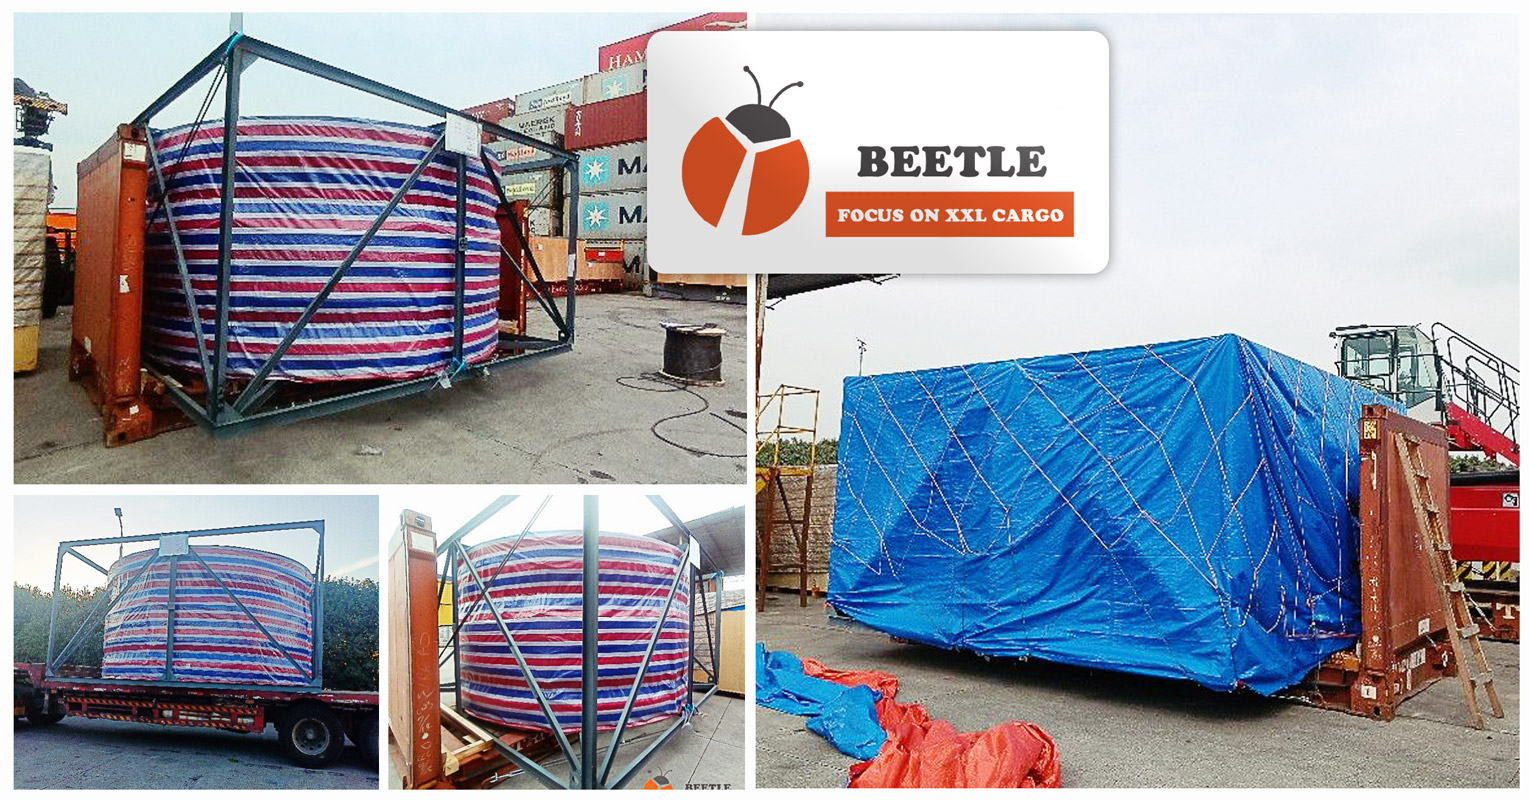 Shanghai Beetle Shipped 4.86m Wide Cargo from Shanghai to Durrës, Albania by Flat Rack